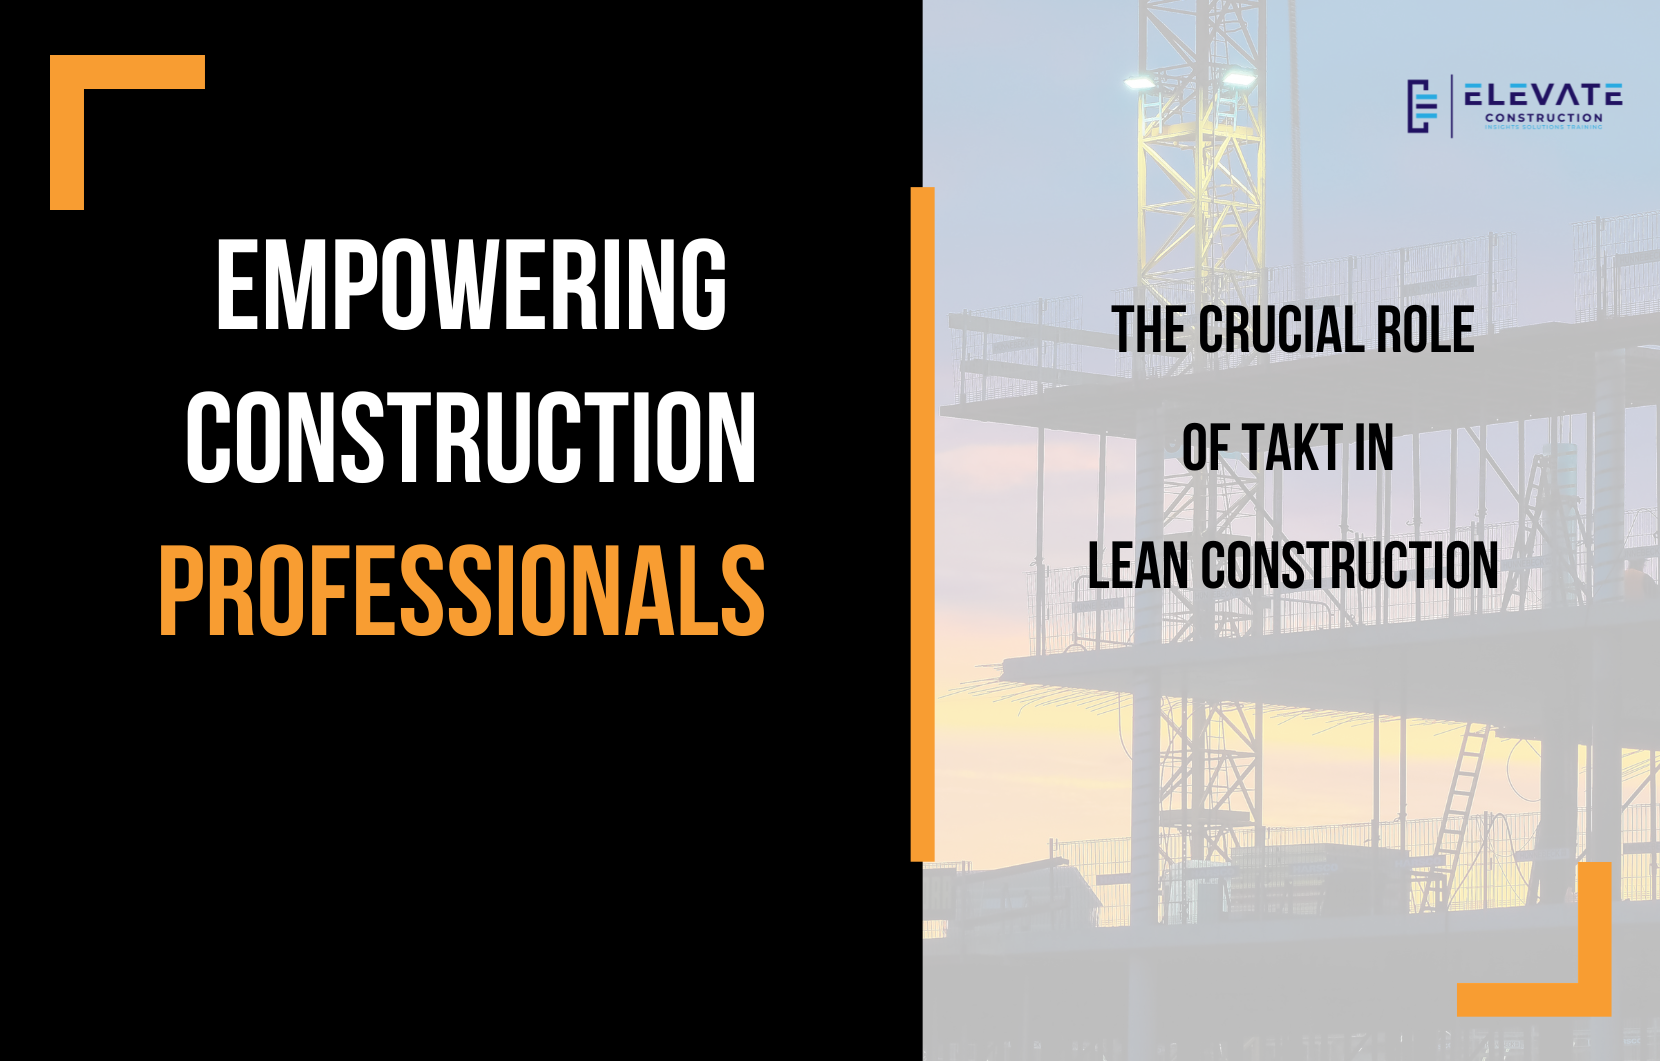 Empowering Construction Professionals: The Crucial Role of Takt in Lean Construction